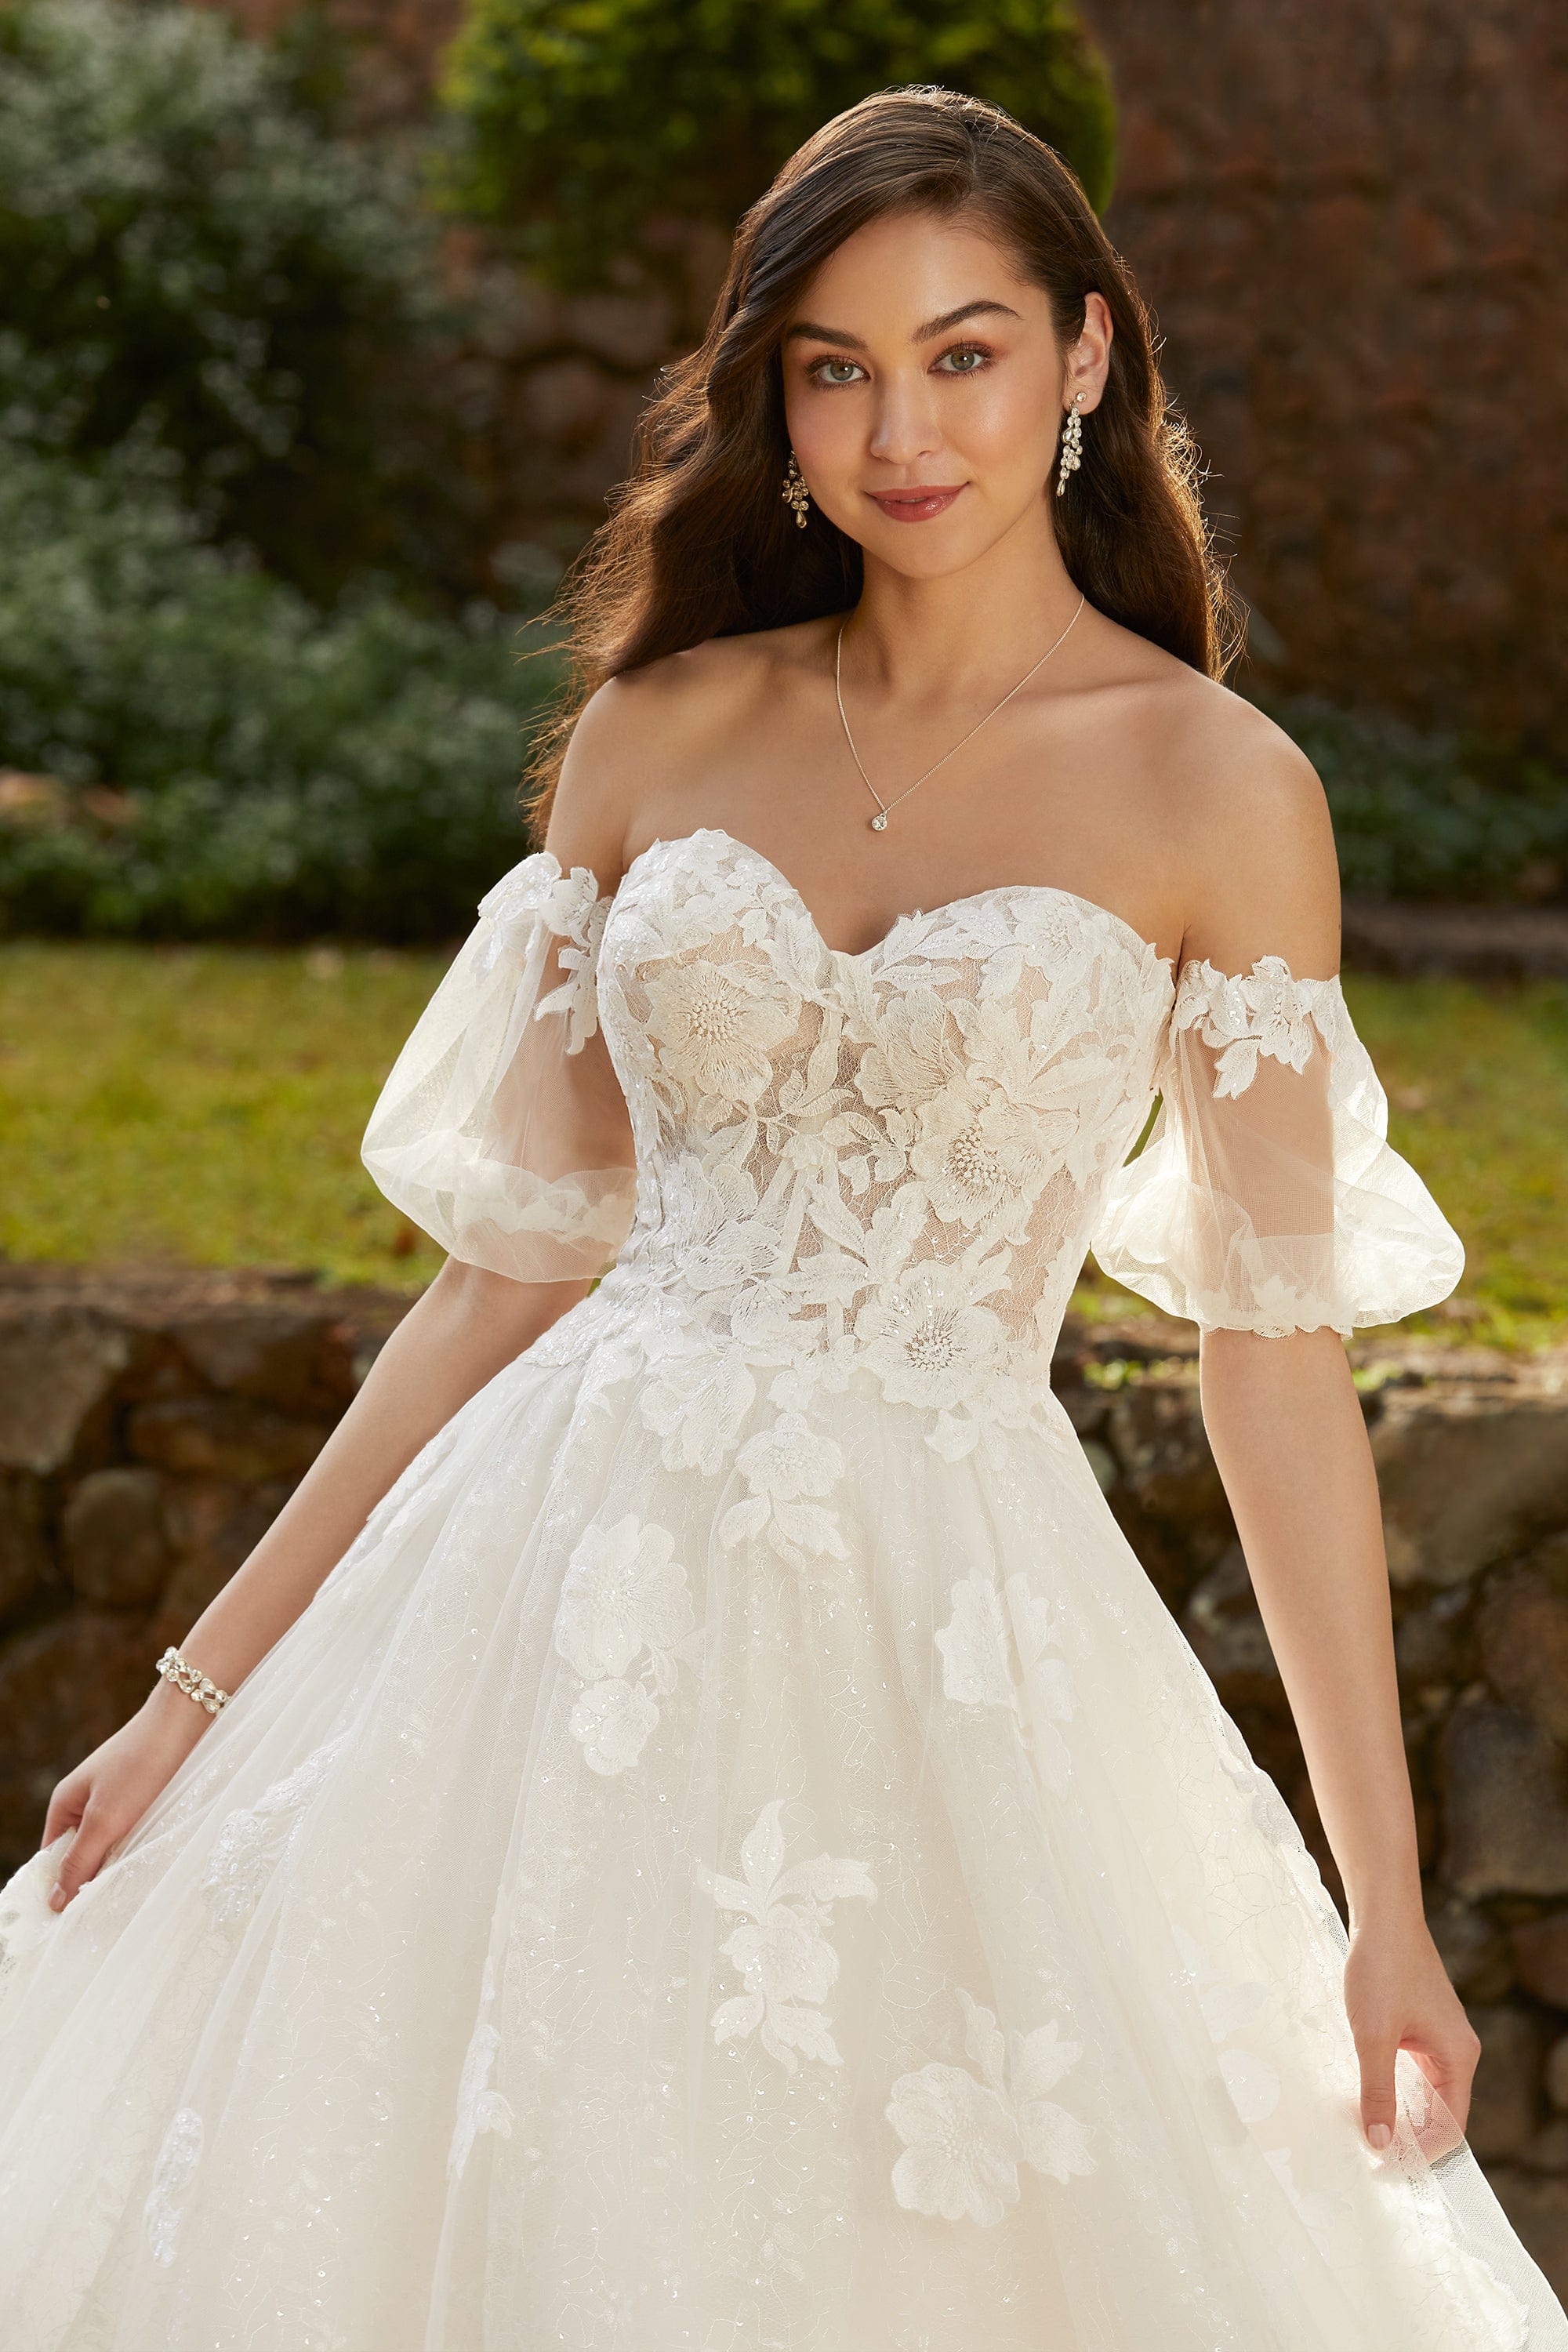 Lace Wedding Dresses and Accessories | Opportunity Bridal